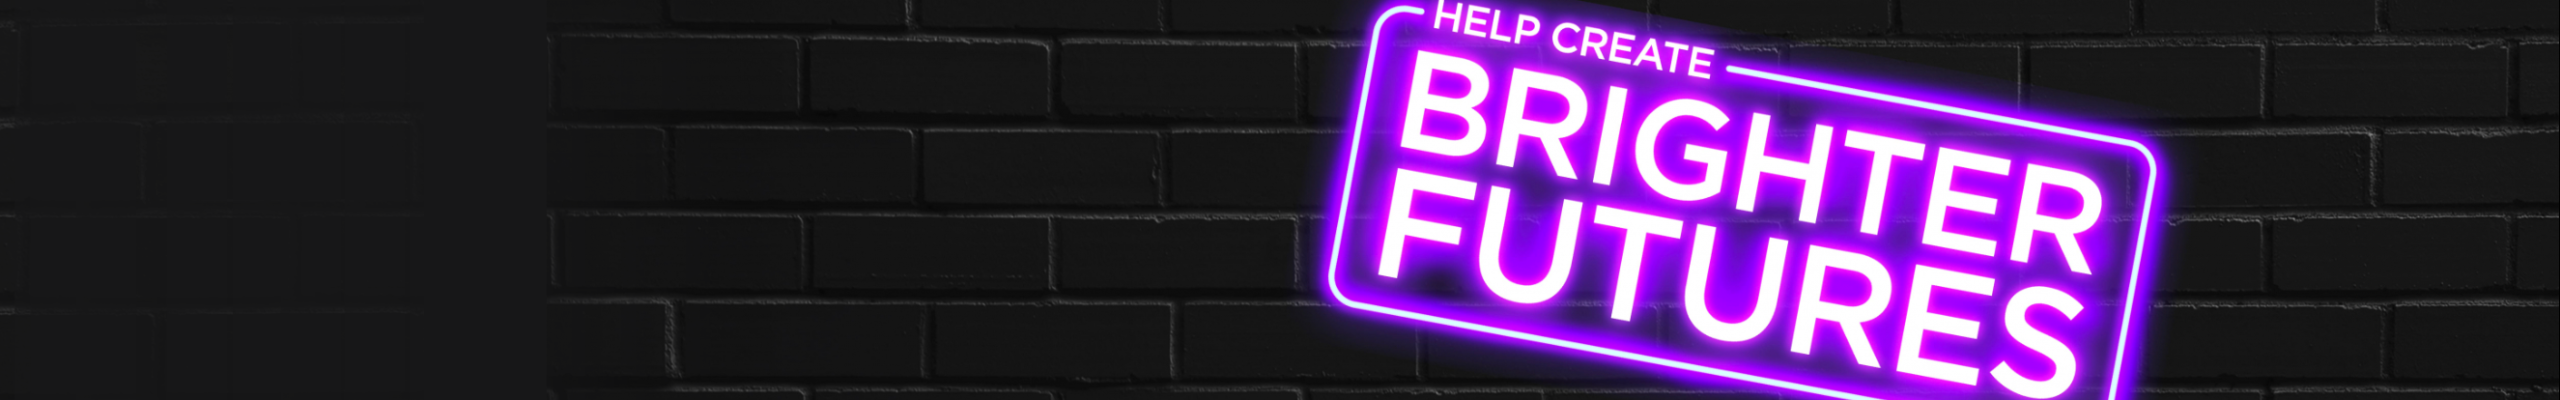 Black brick wall with neon sign reading "help create brighter futures"